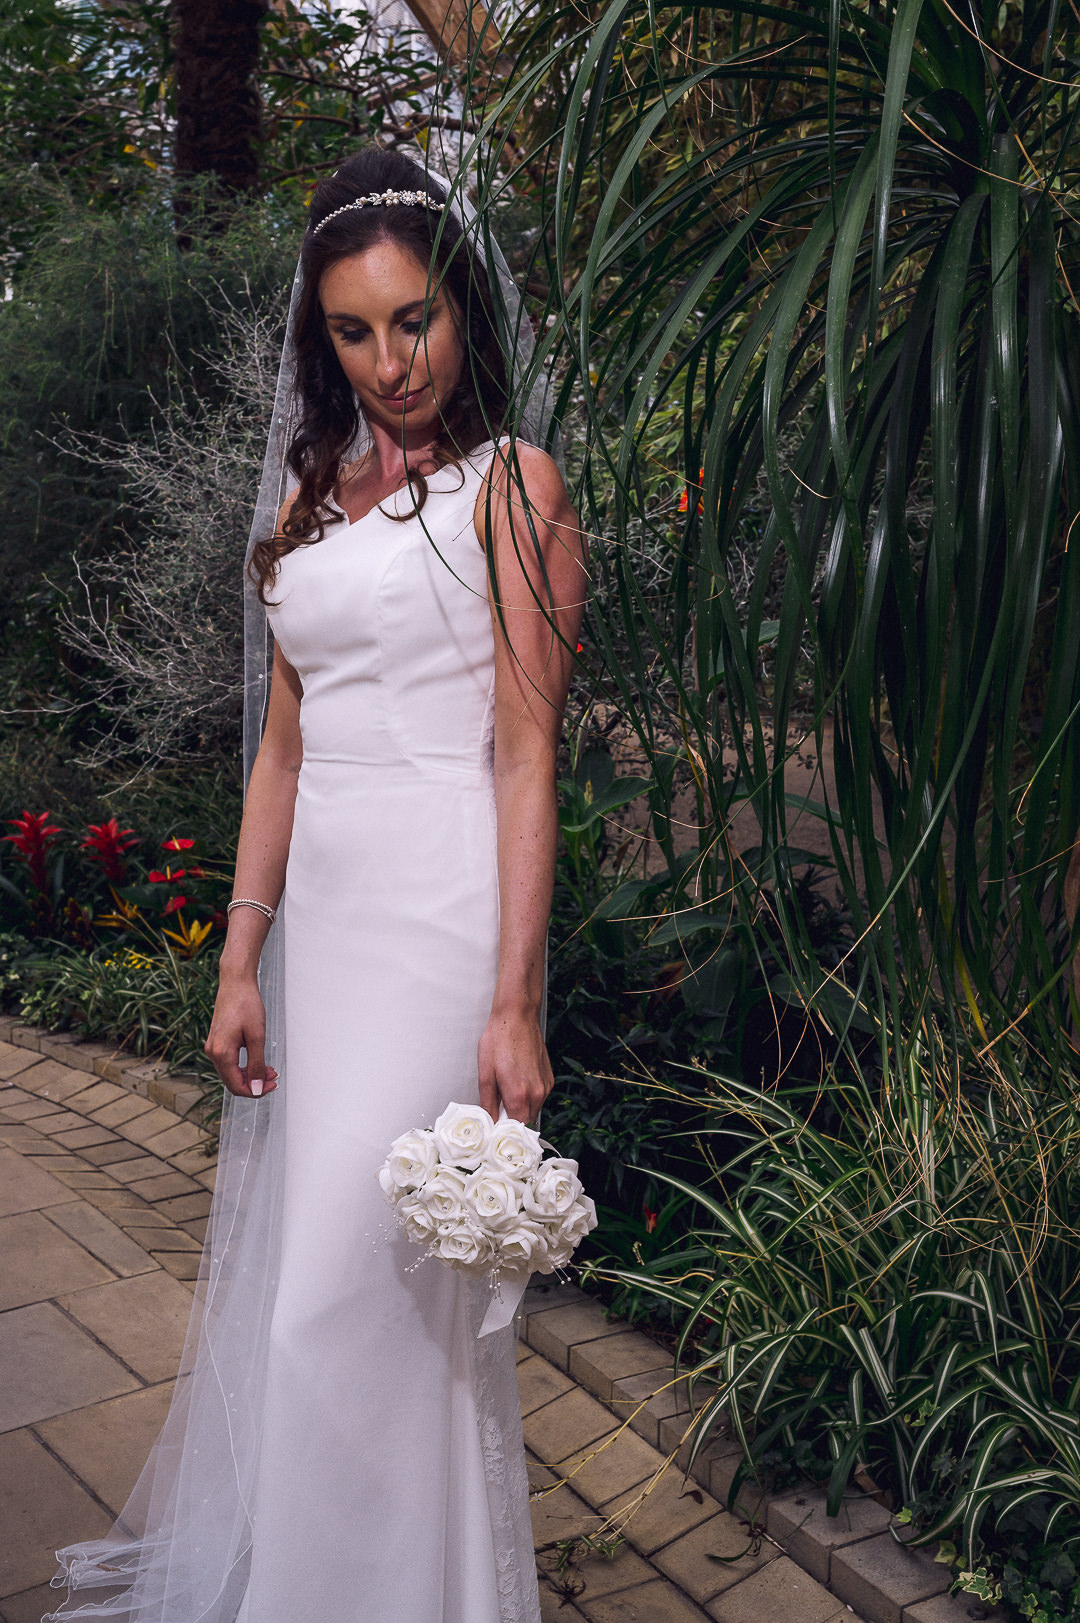 the bride poses alone in the winter gardens